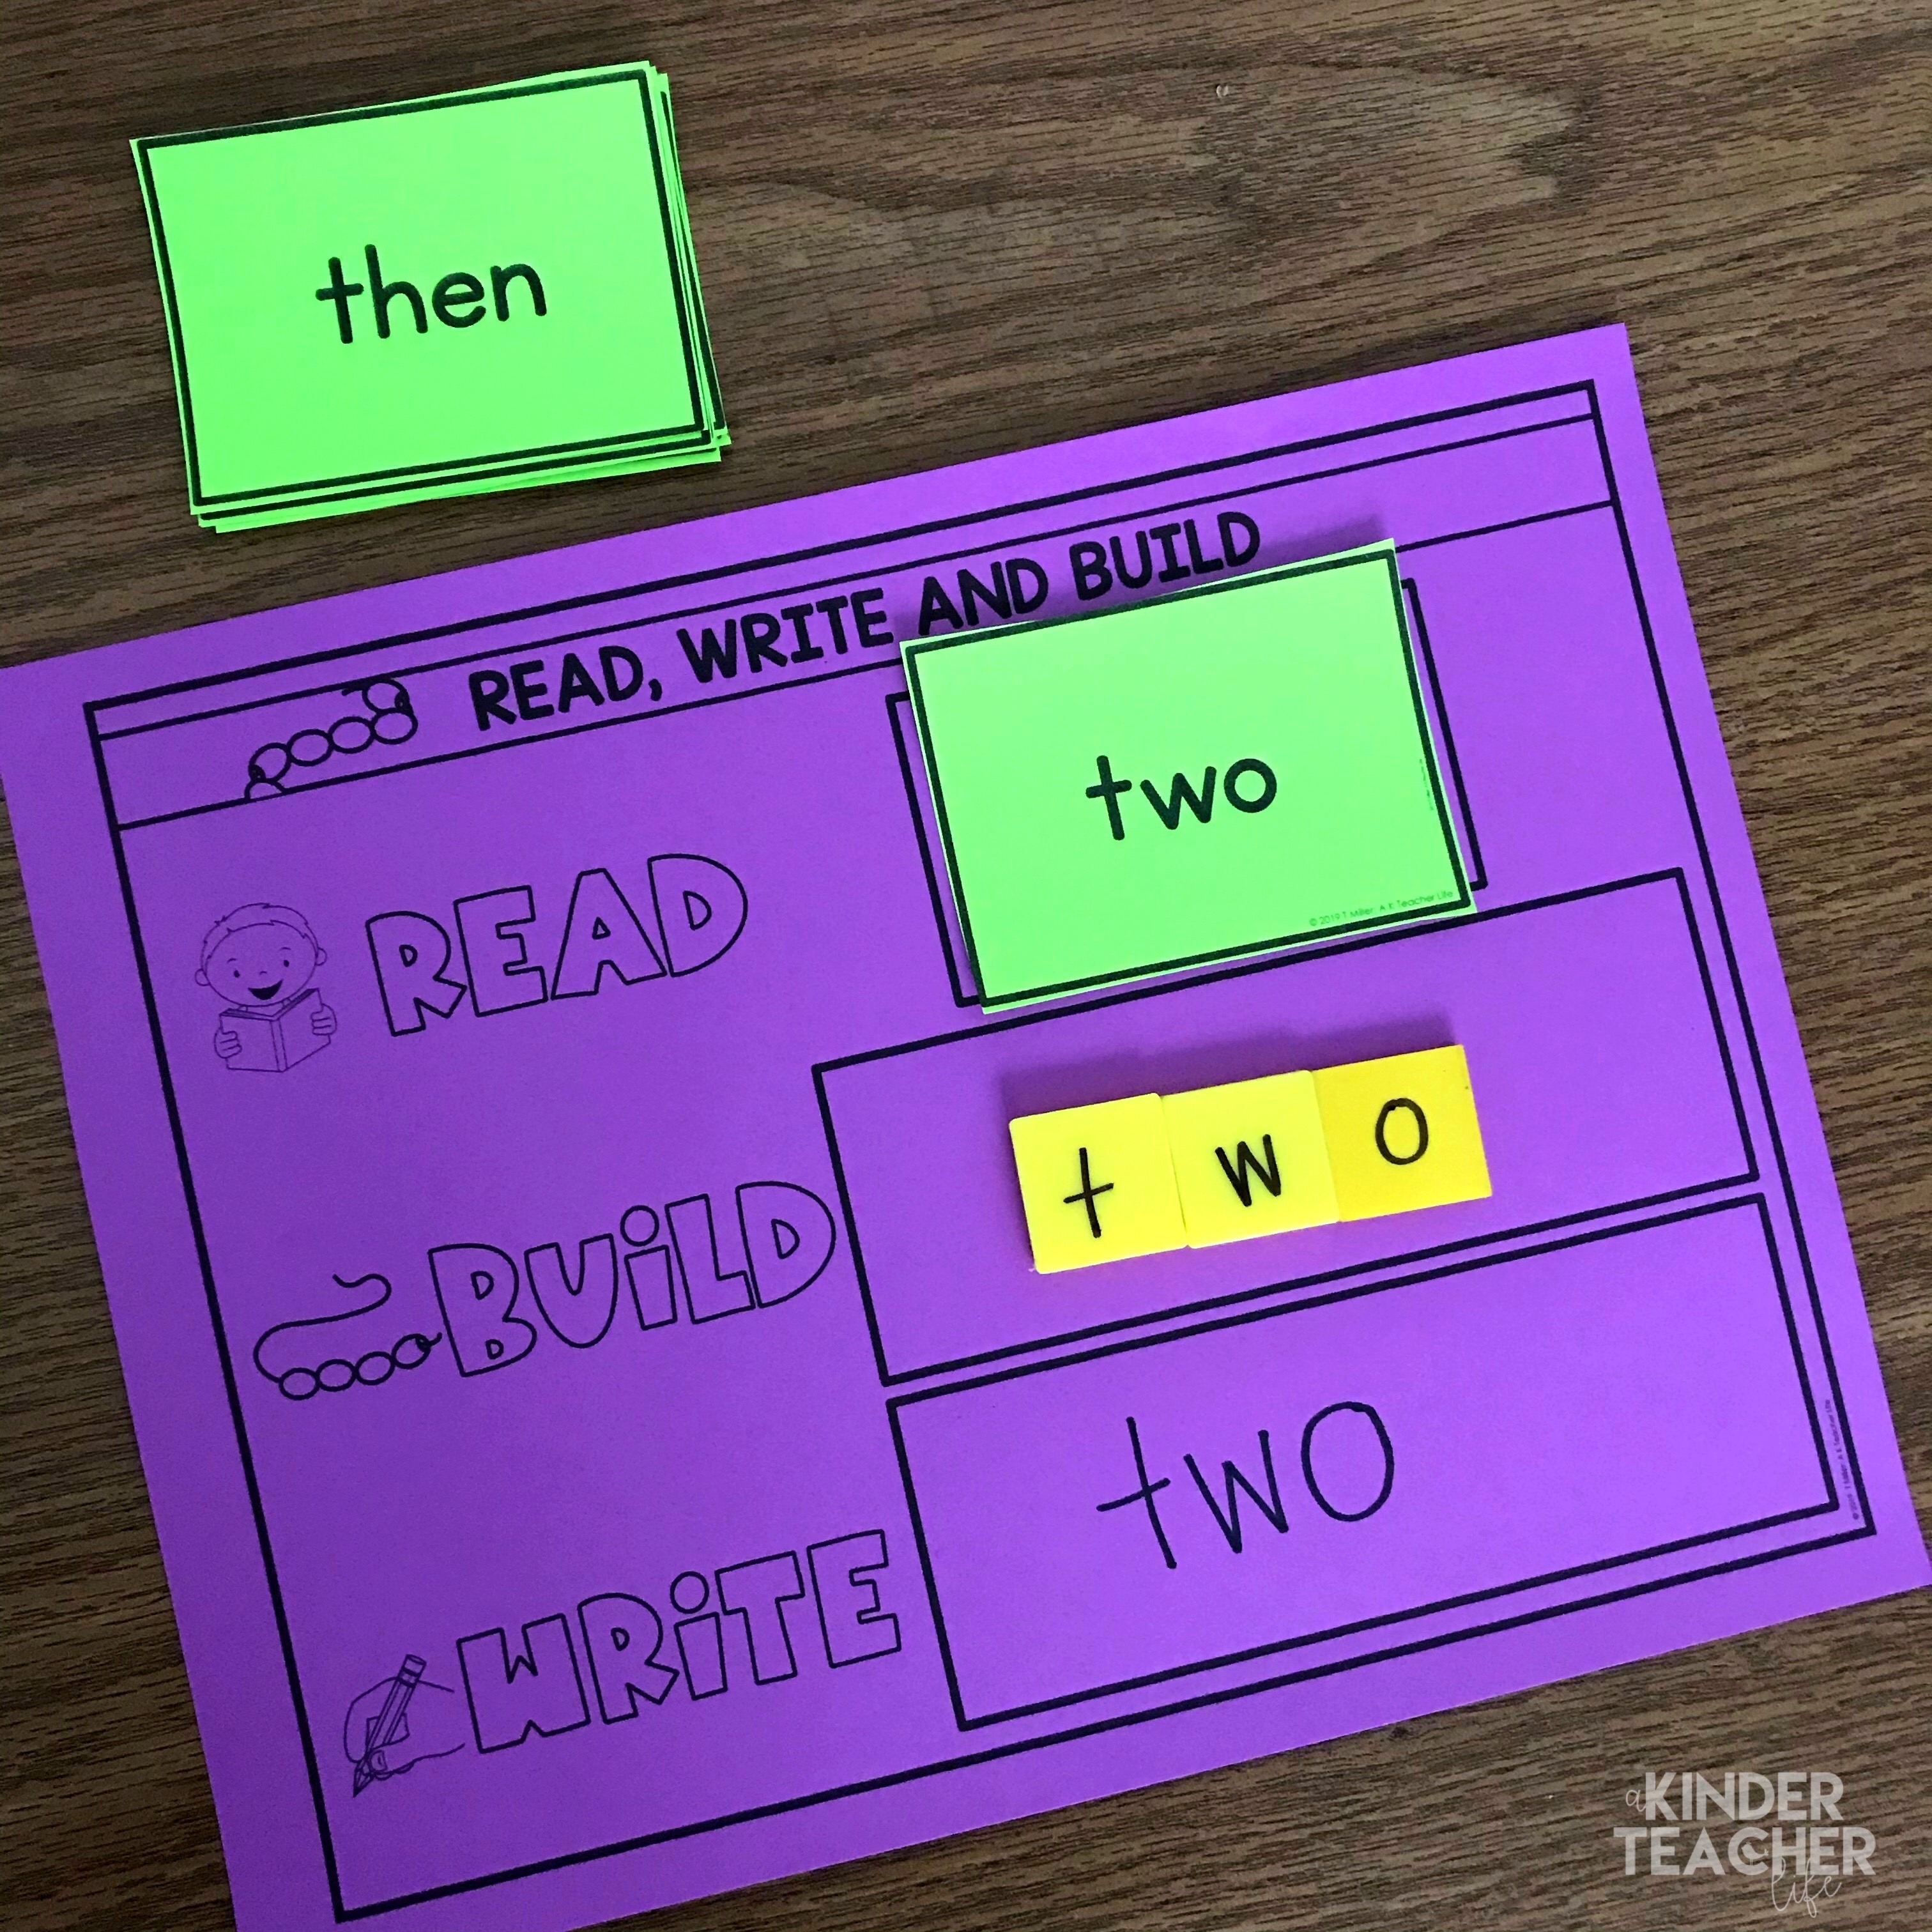 Here's a list of four hands-on activities to make sight word practice fun and engaging. These activities include using stamps, building and writing words and reading sentences. Use these no prep activities at school or home.